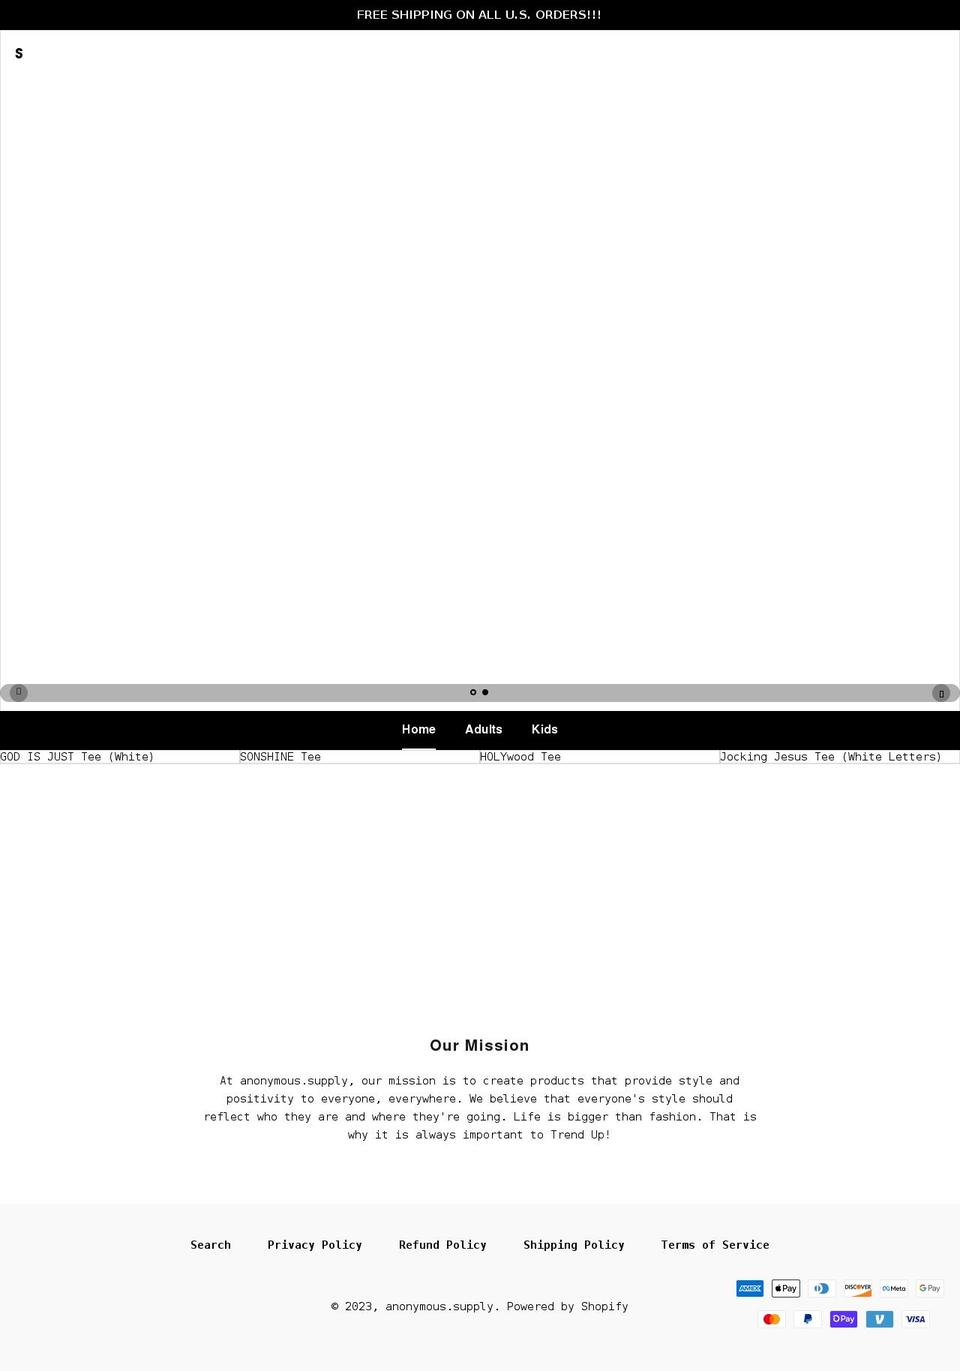 anonymous.supply shopify website screenshot